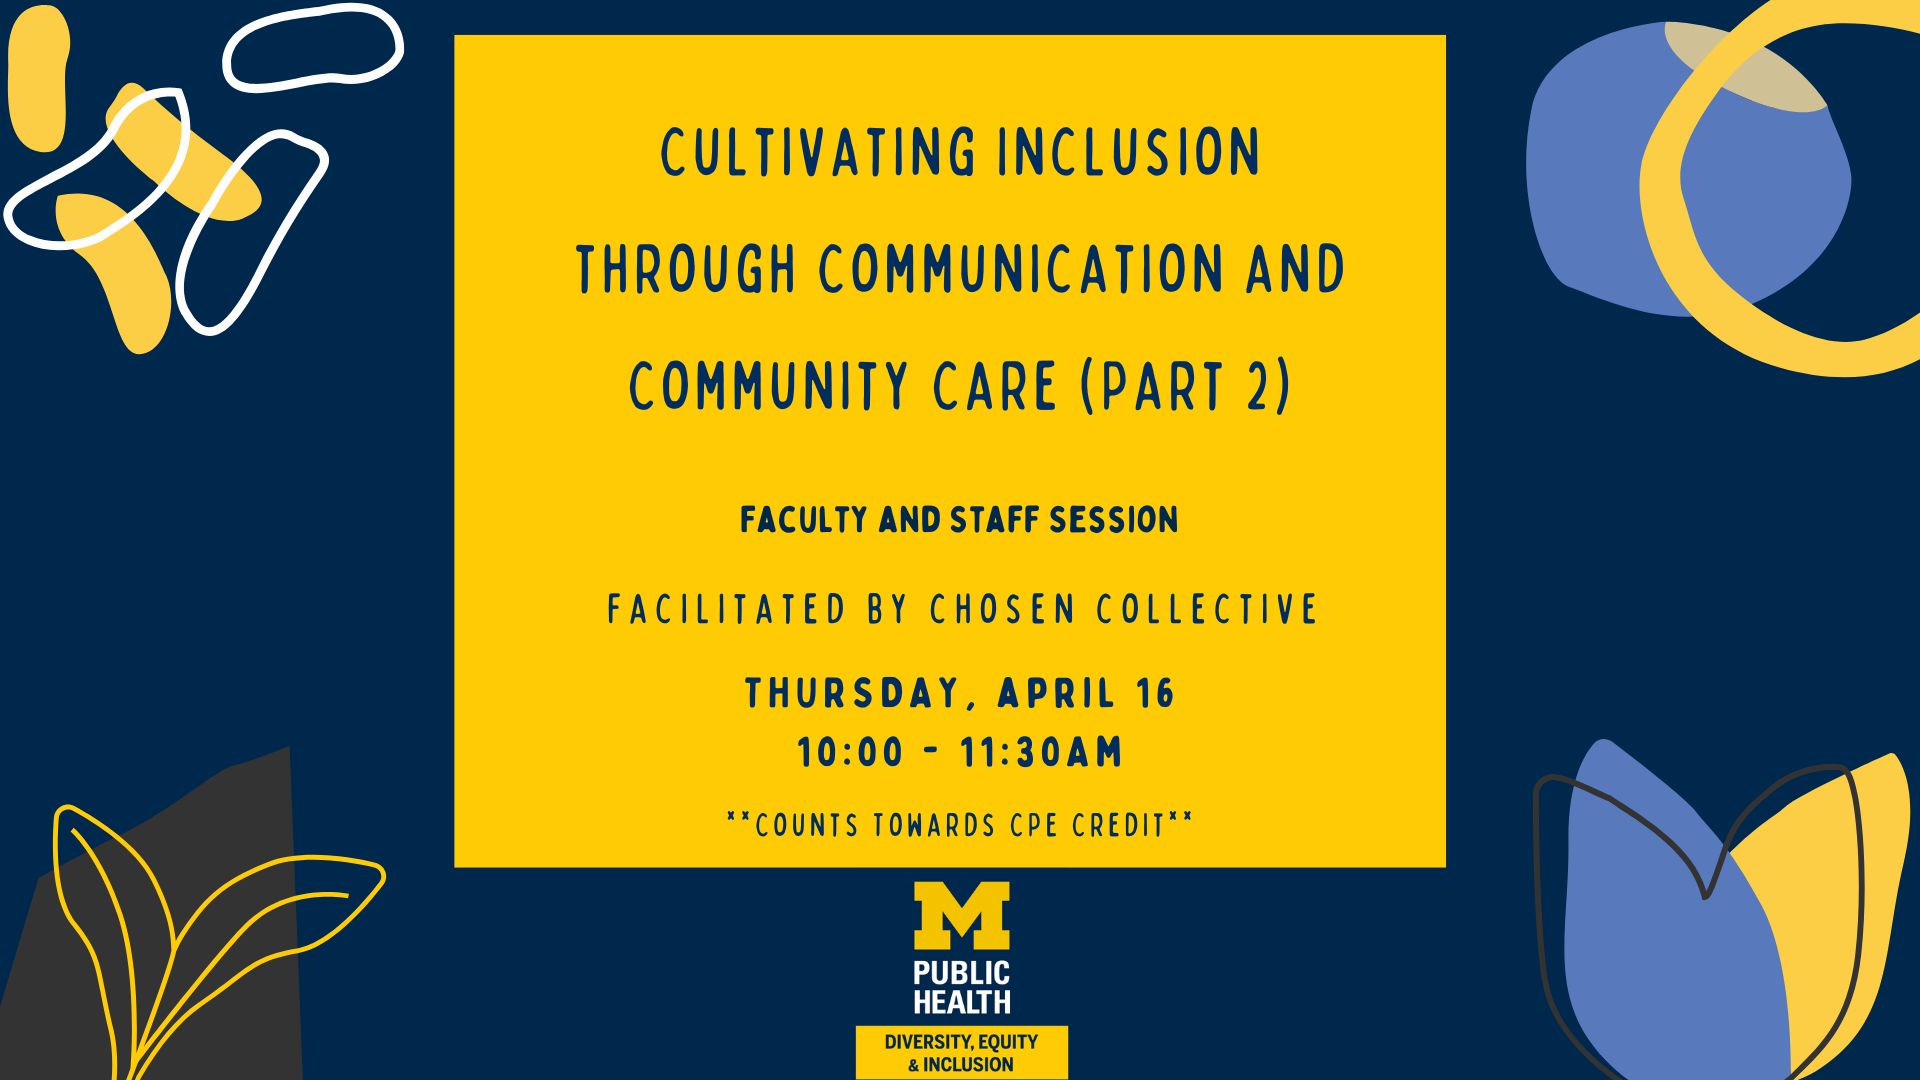 Event Flyer for Cultivating Inclusion through Communication and Community Care (Part 2)